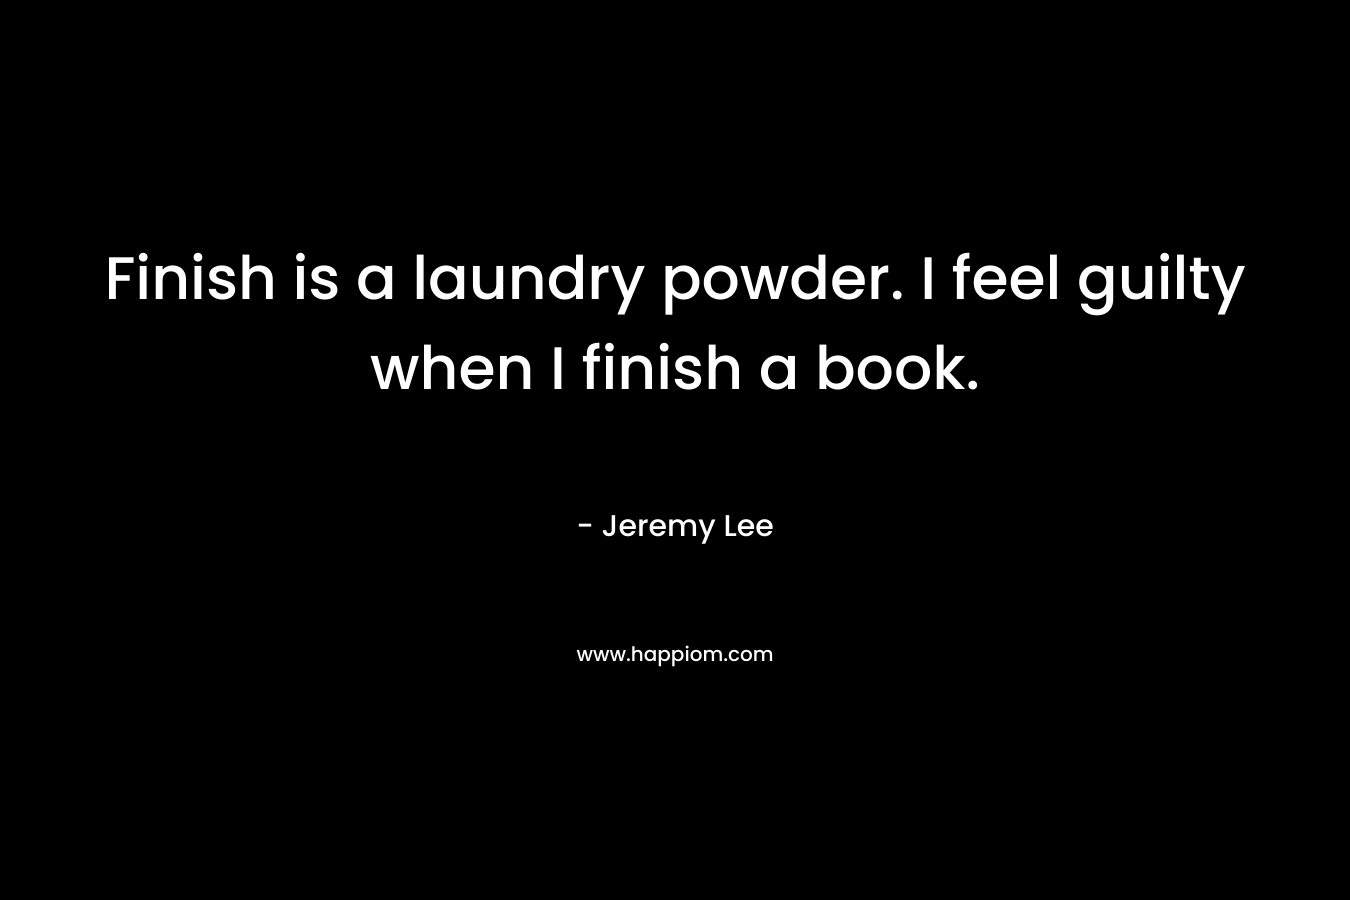 Finish is a laundry powder. I feel guilty when I finish a book.